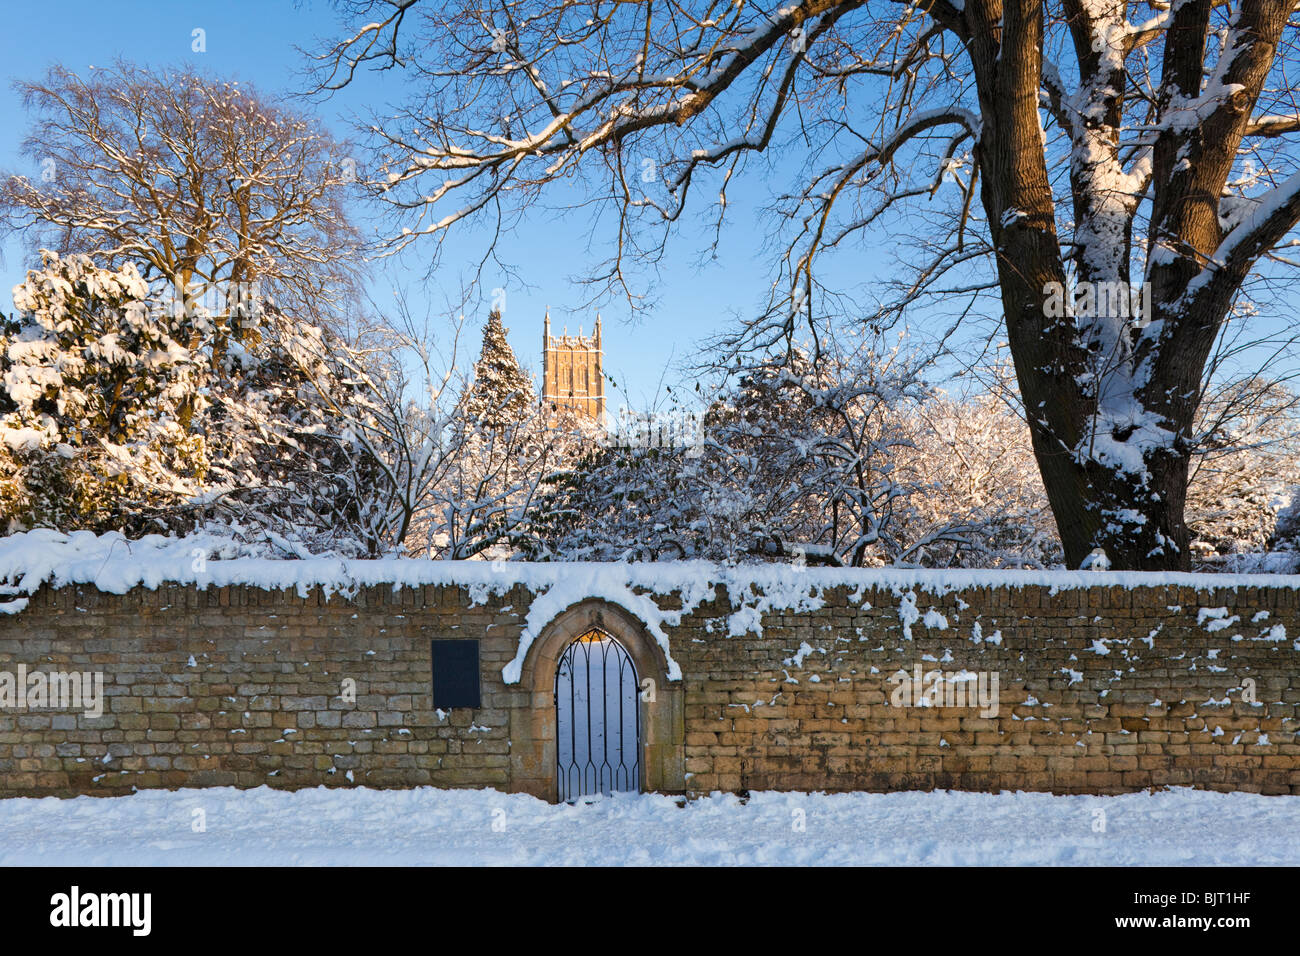 Winter snow on the Ernest Wilson Memorial Garden and St James church in the Cotswold town of Chipping Campden, Gloucestershire Stock Photo